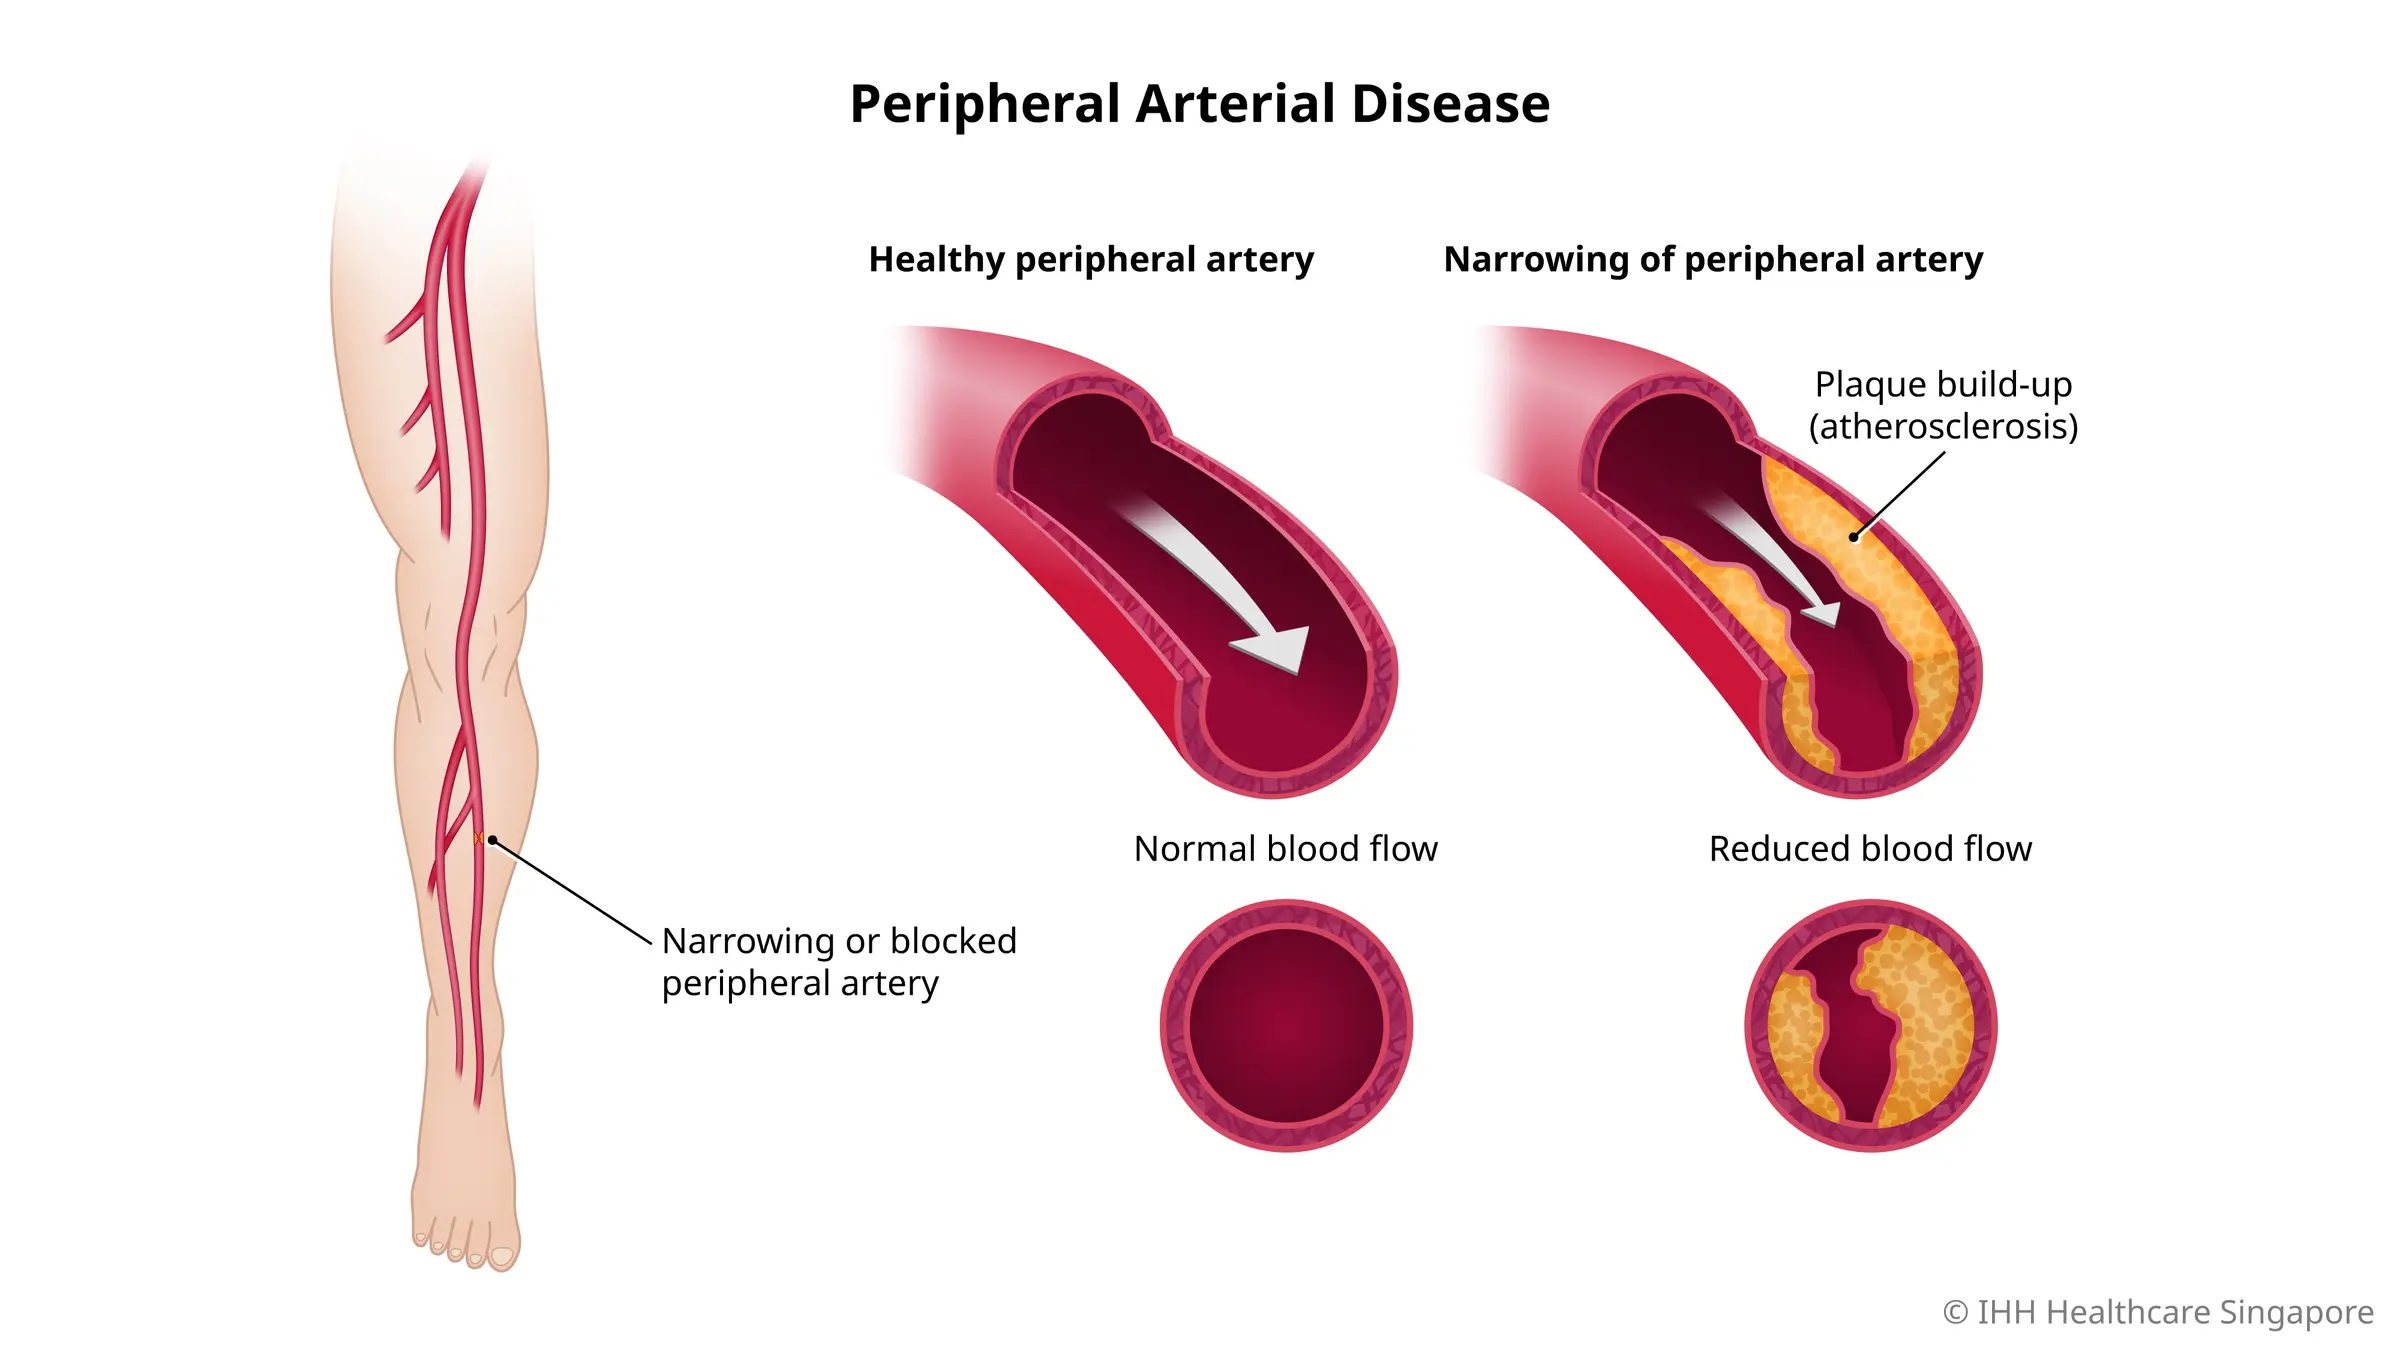 Peripheral arterial disease is usually caused by artherosclerosis and leads to reduced blood circulation to the legs.